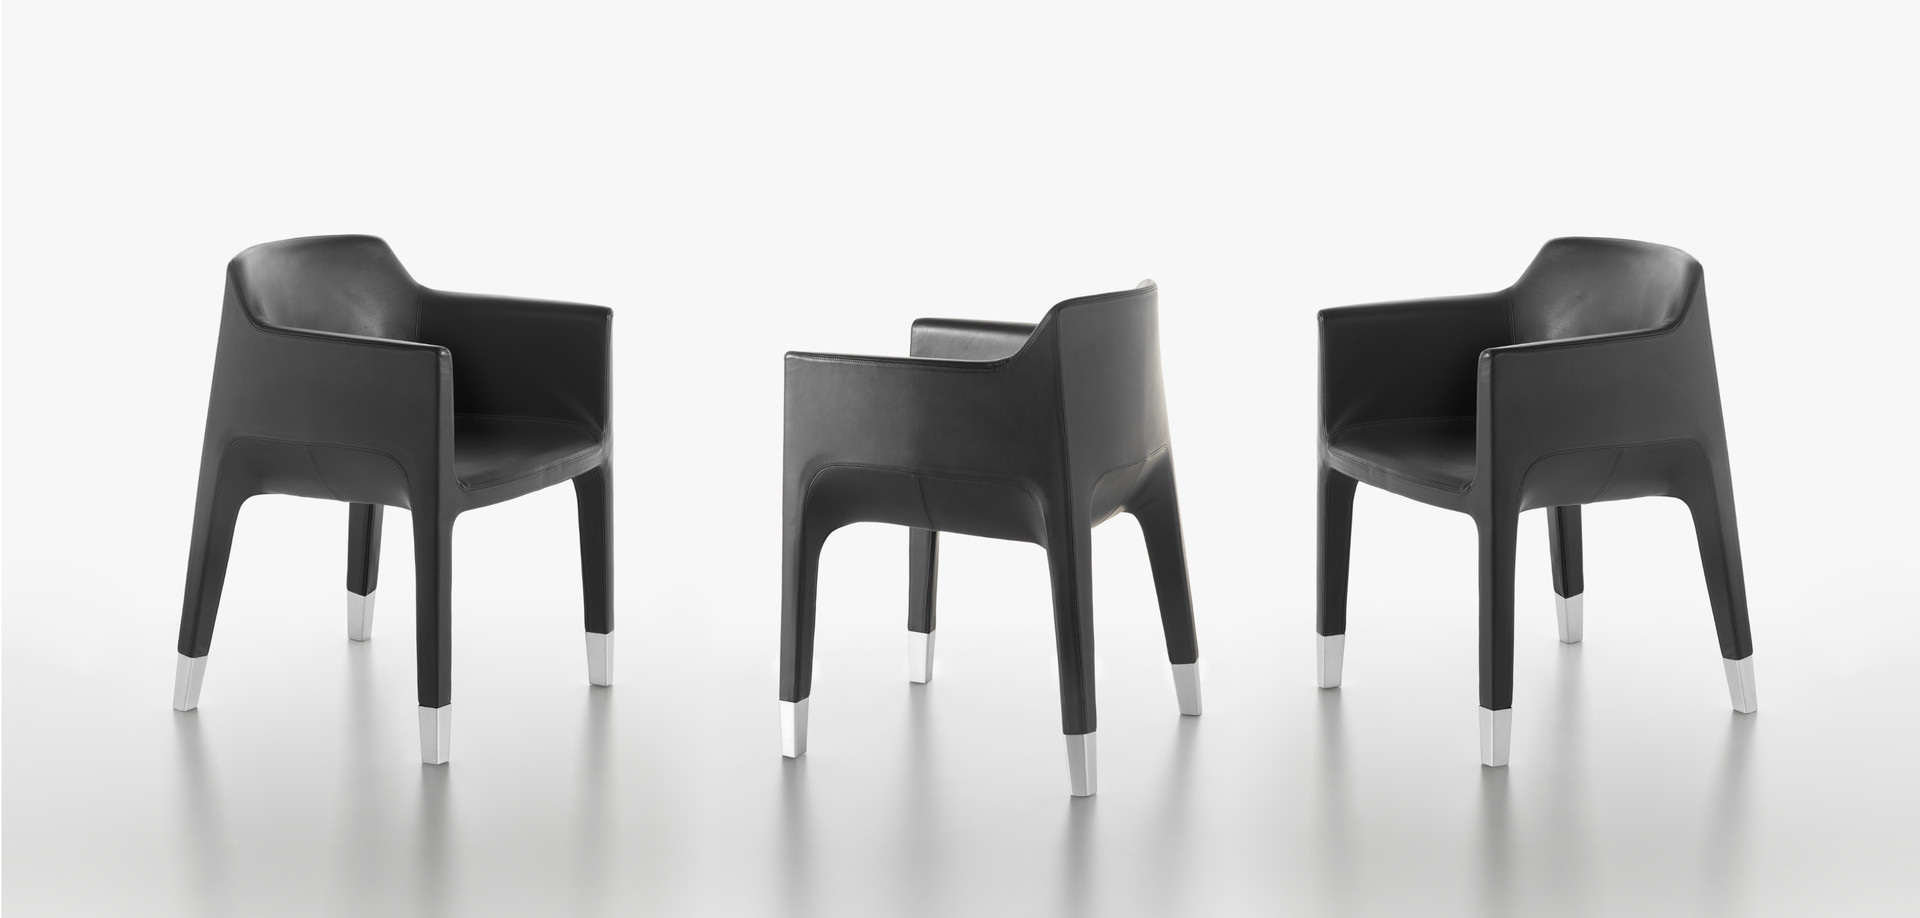 Plank - MON AMI armchair with steel frame, matt chrome feet, coverings in leather or textile.